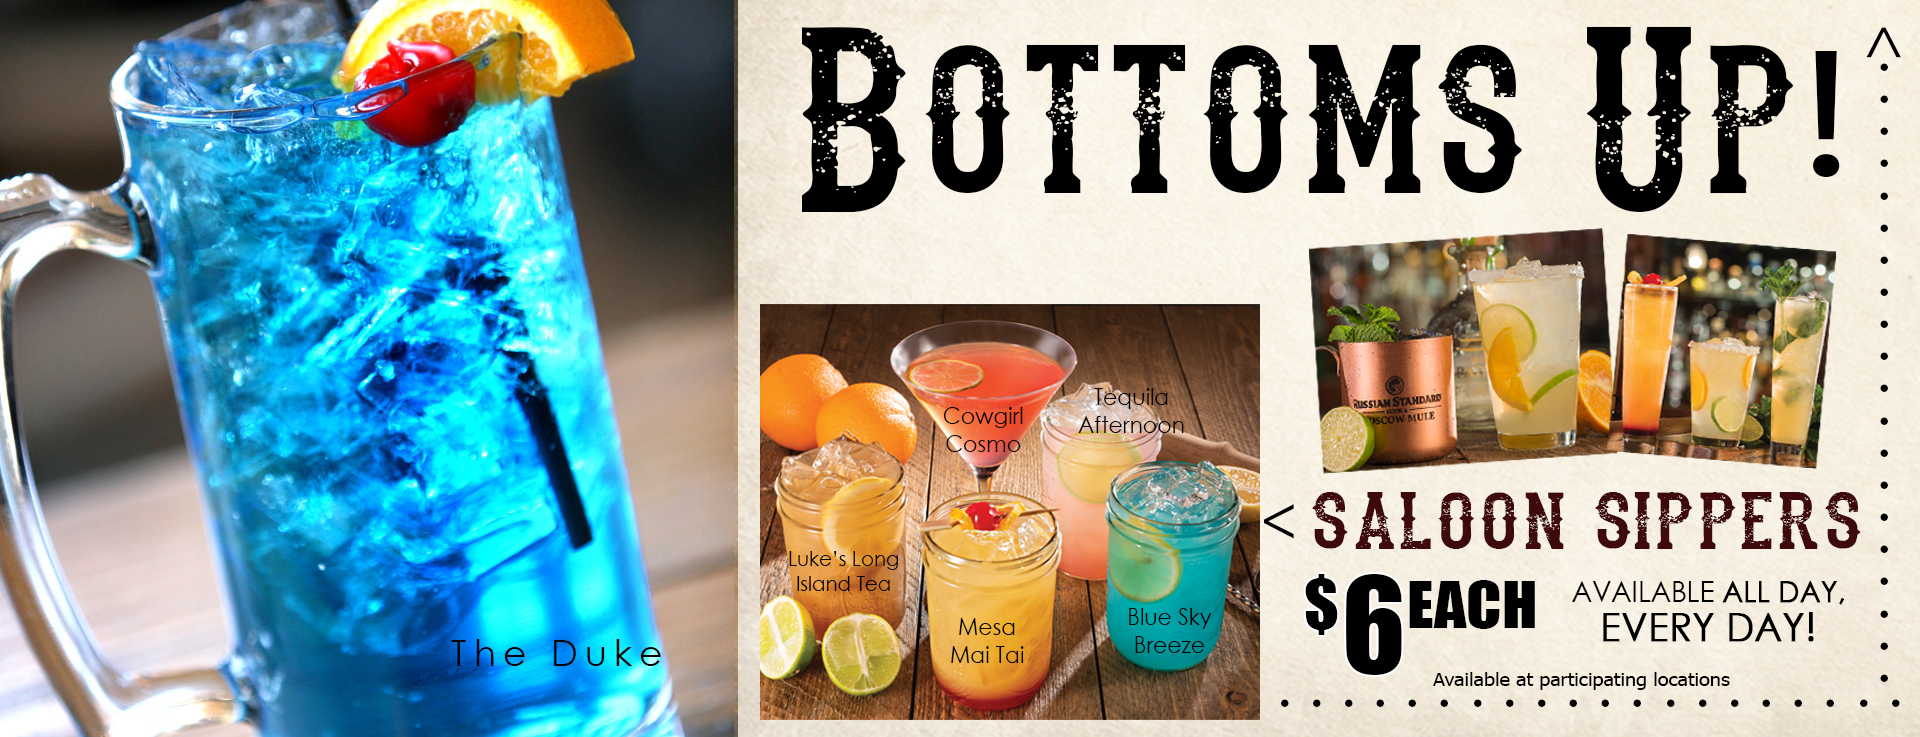 Enjoy a delicious cocktail for $6